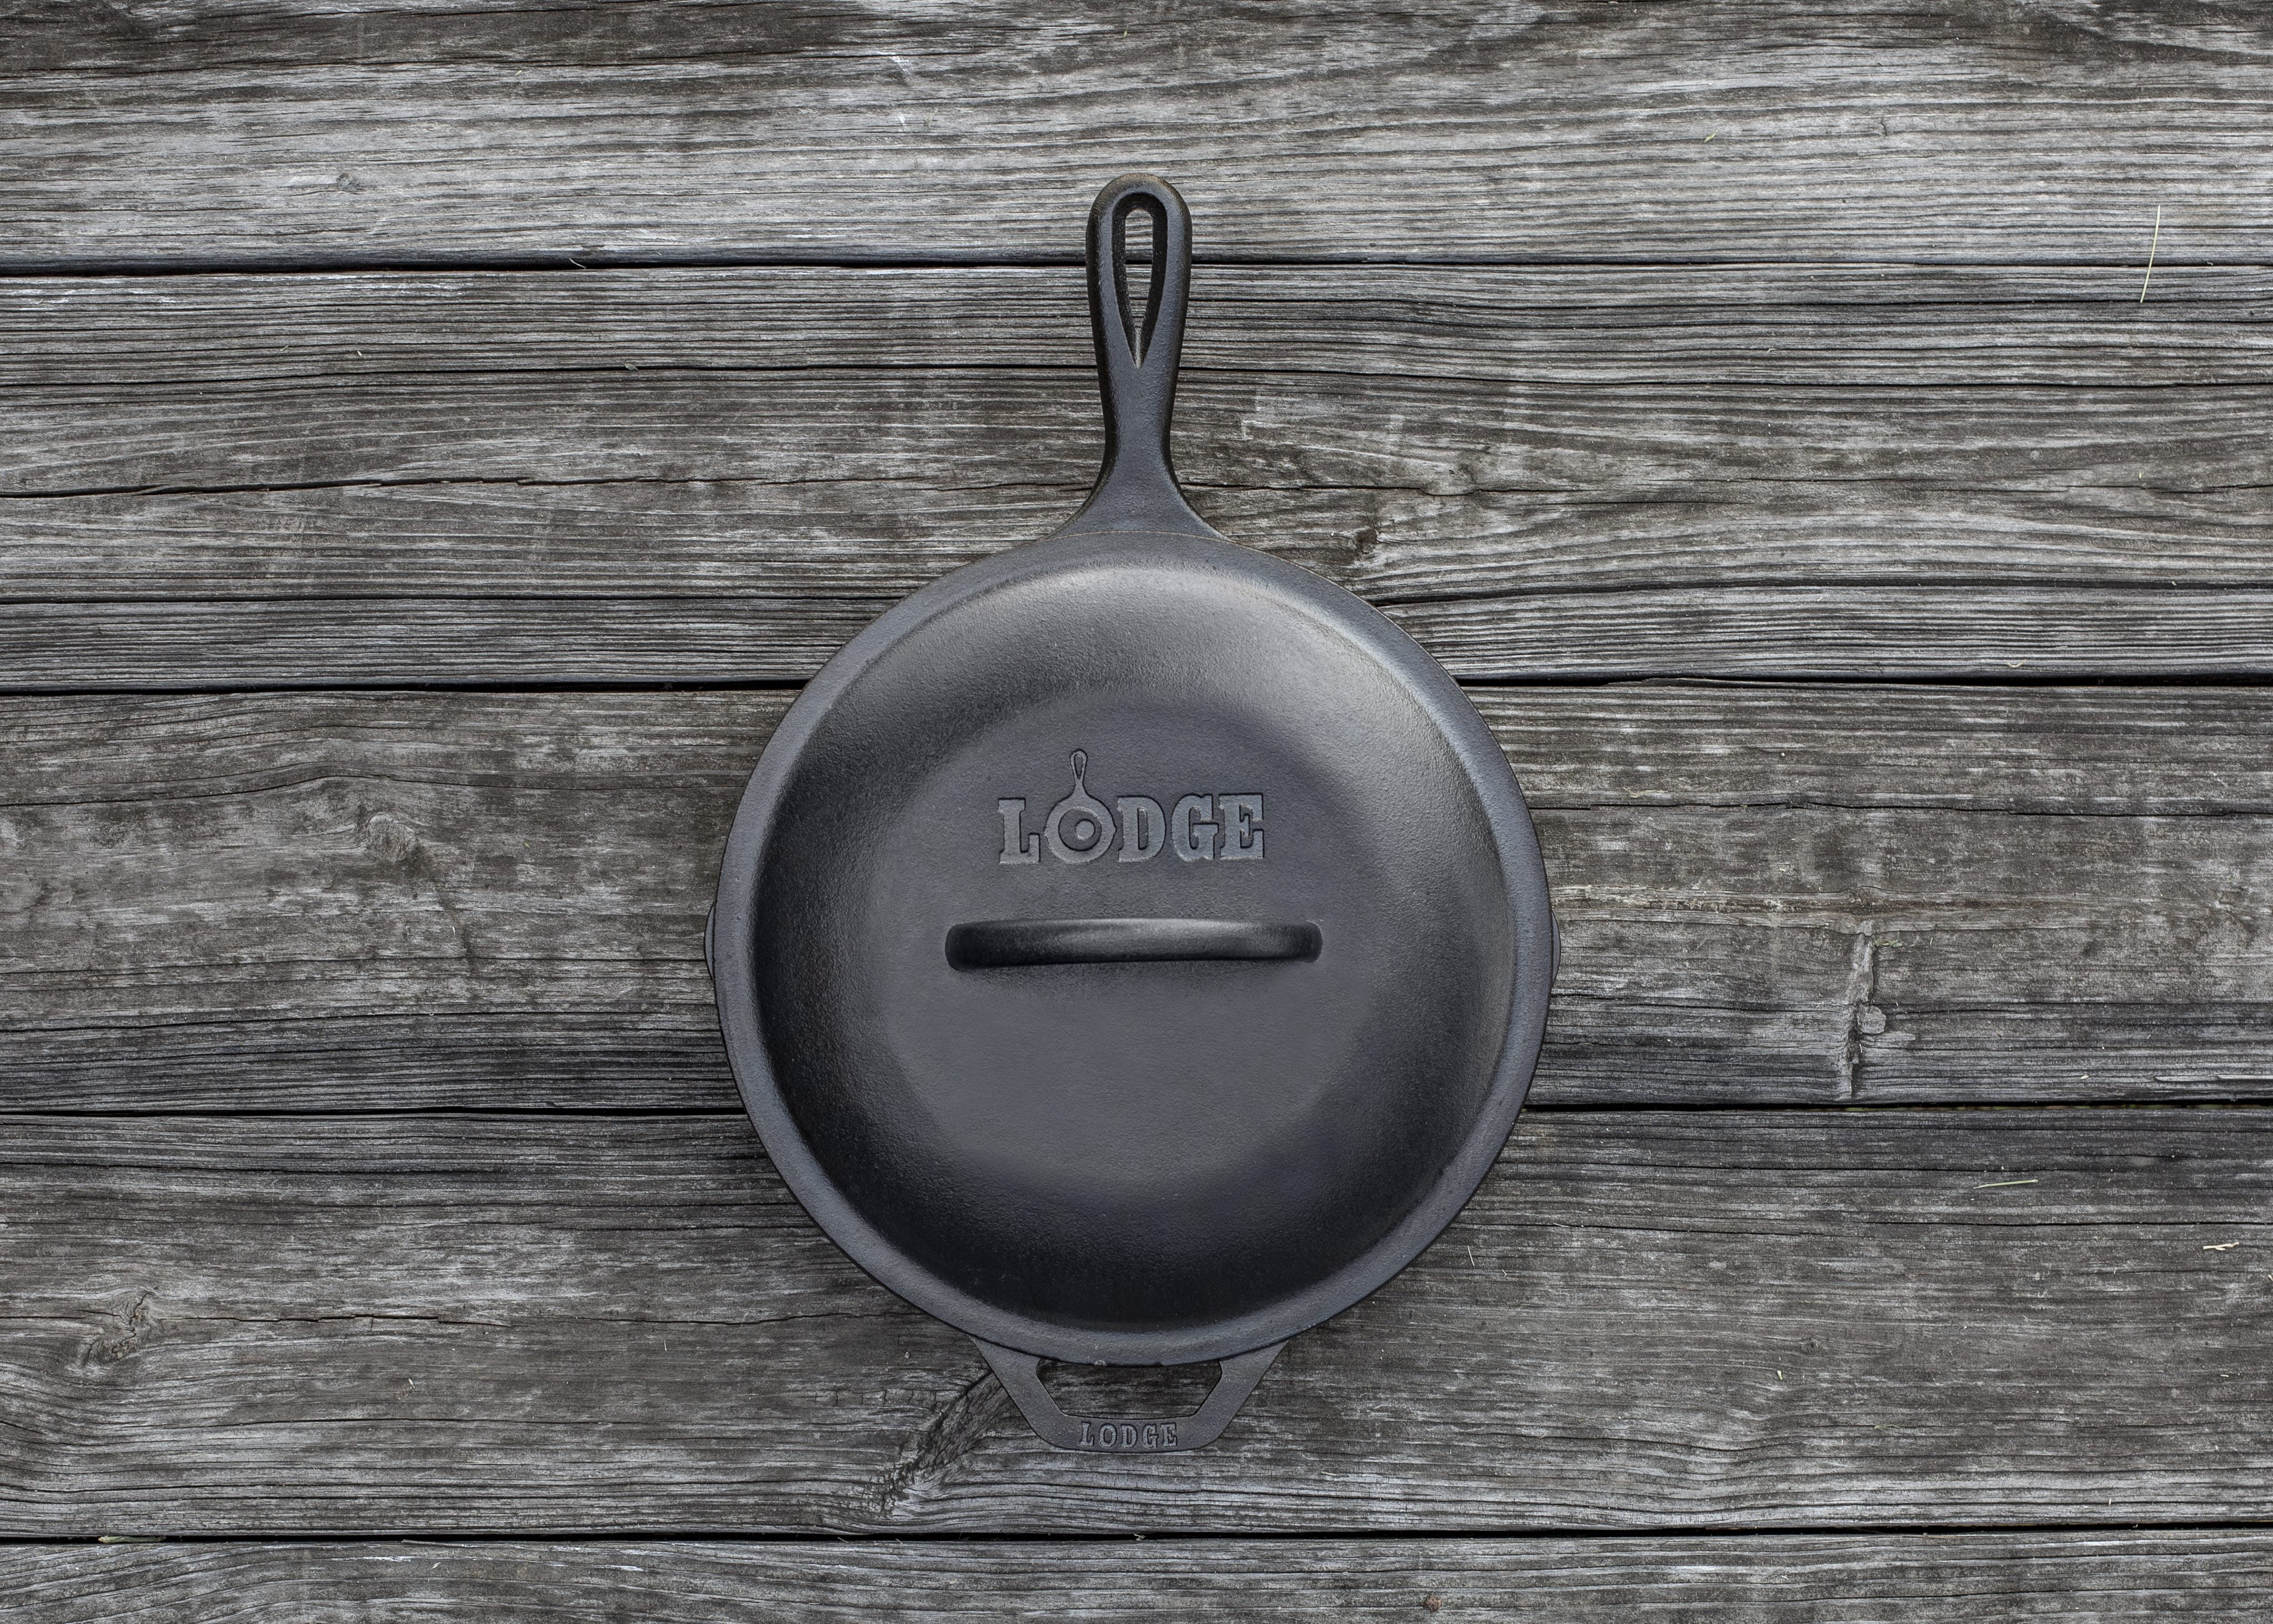 Lodge Cast Iron Deep Skillet, 12 inch & Tempered Glass Lid (12 Inch) – Fits  12 Inch Cast Iron Skillets and 7 Quart Dutch Ovens